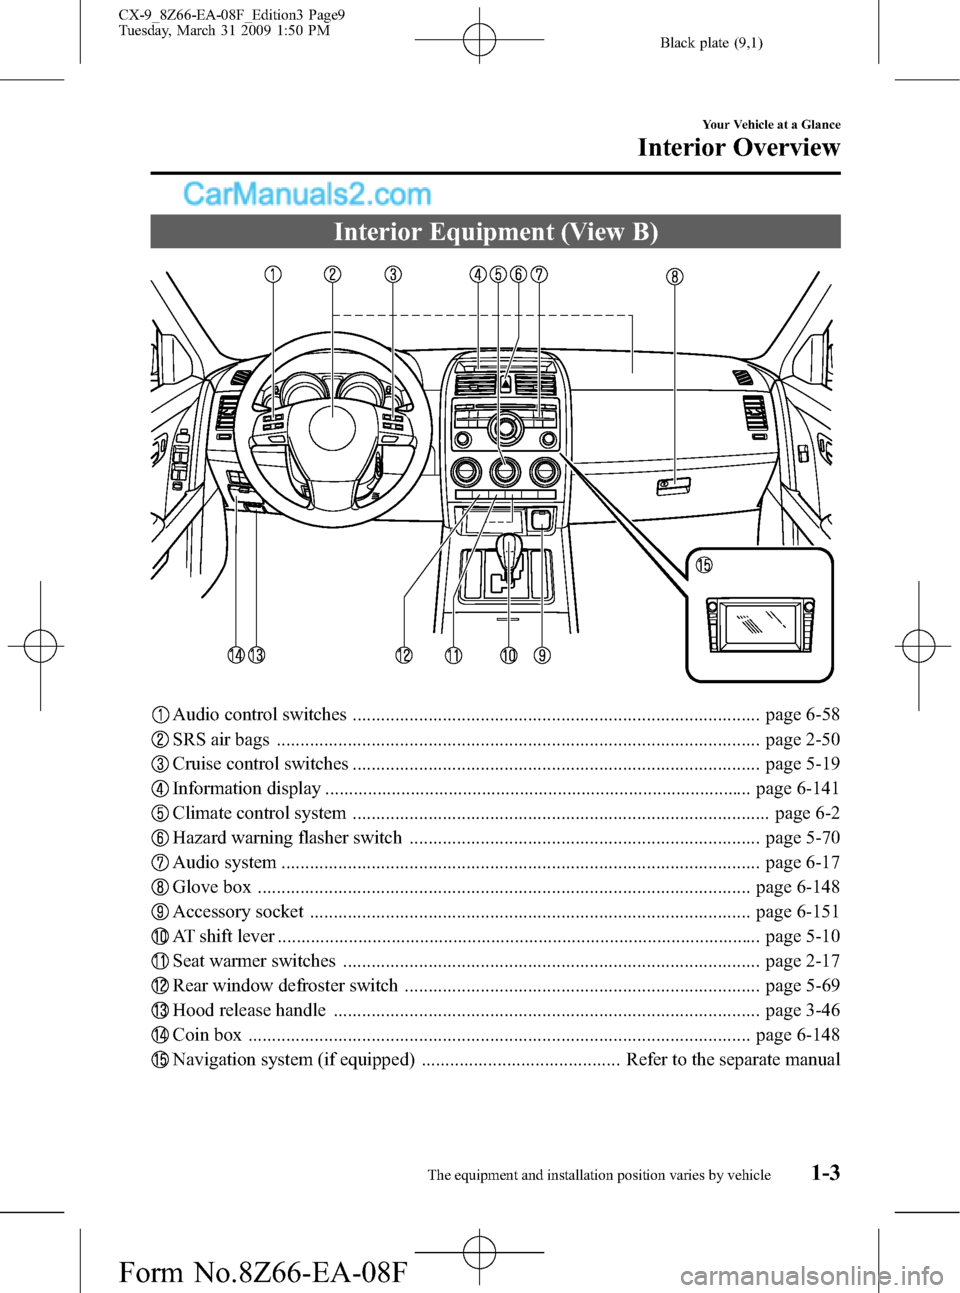 MAZDA MODEL CX-9 2009  Owners Manual (in English) Black plate (9,1)
Interior Equipment (View B)
Audio control switches ...................................................................................... page 6-58
SRS air bags .....................